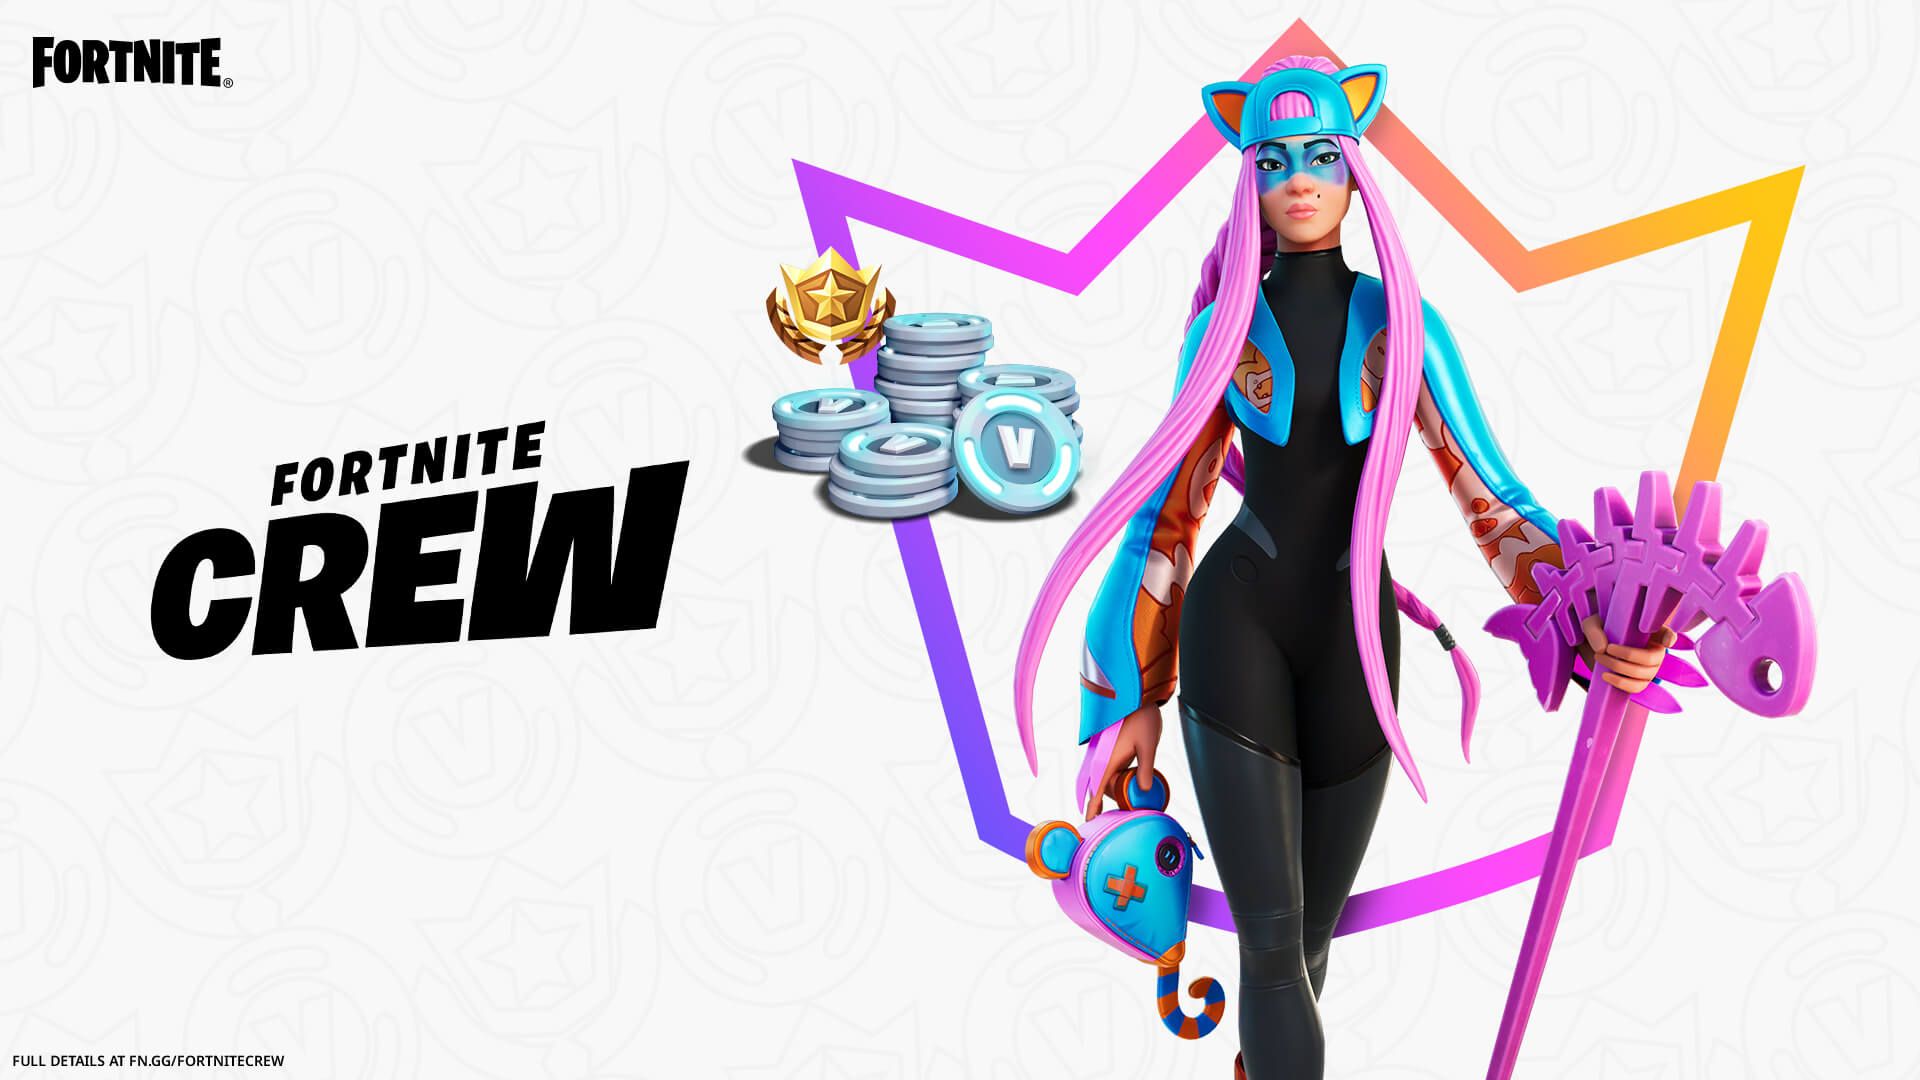 Reunited Kin: The Cat Like Alli Comes To Fortnite Crew In April